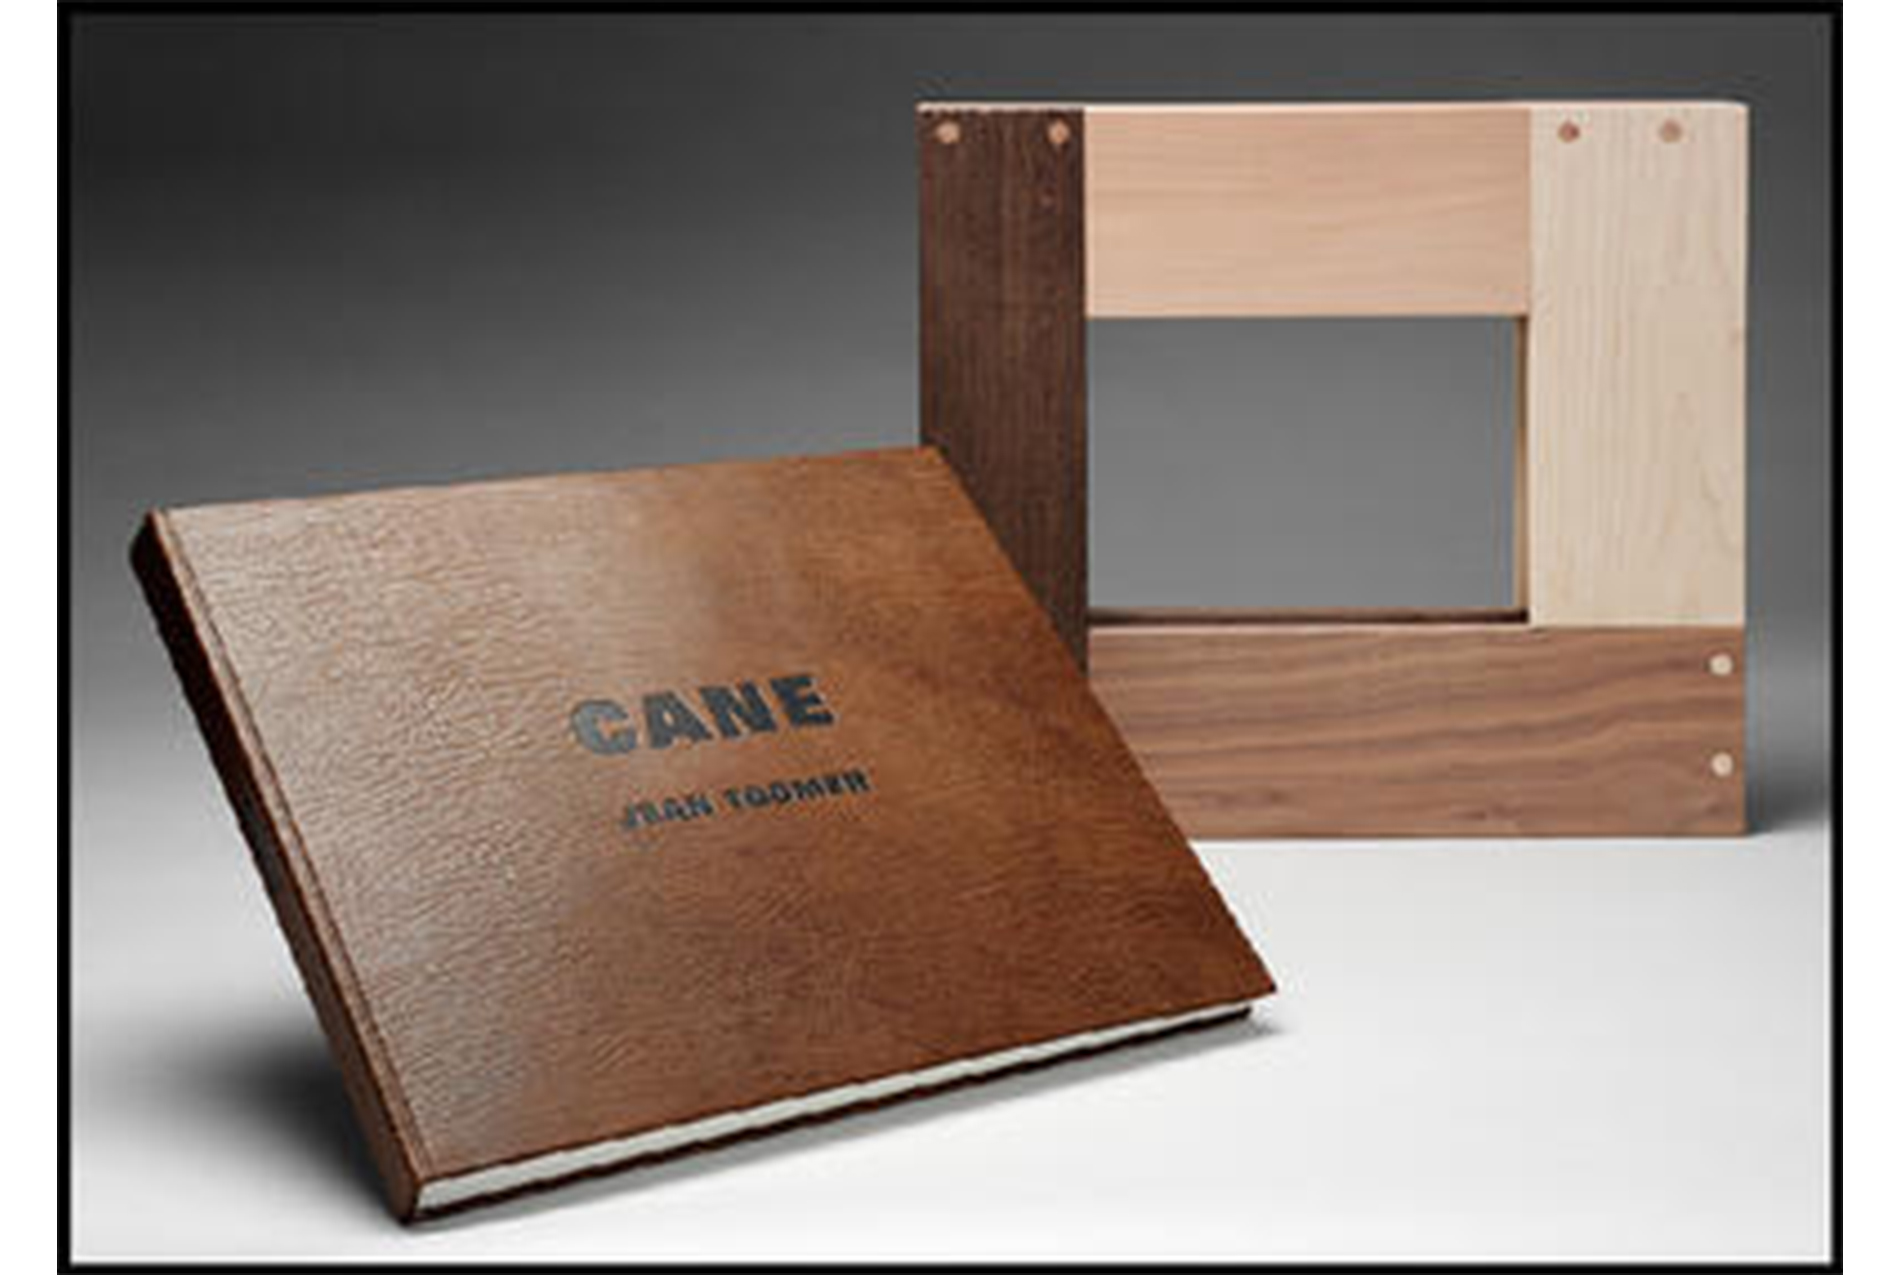 leather-covered book that says "CANE" in black on the cover, propped up next to a wooden frame made with four pieces of differently-colored wood